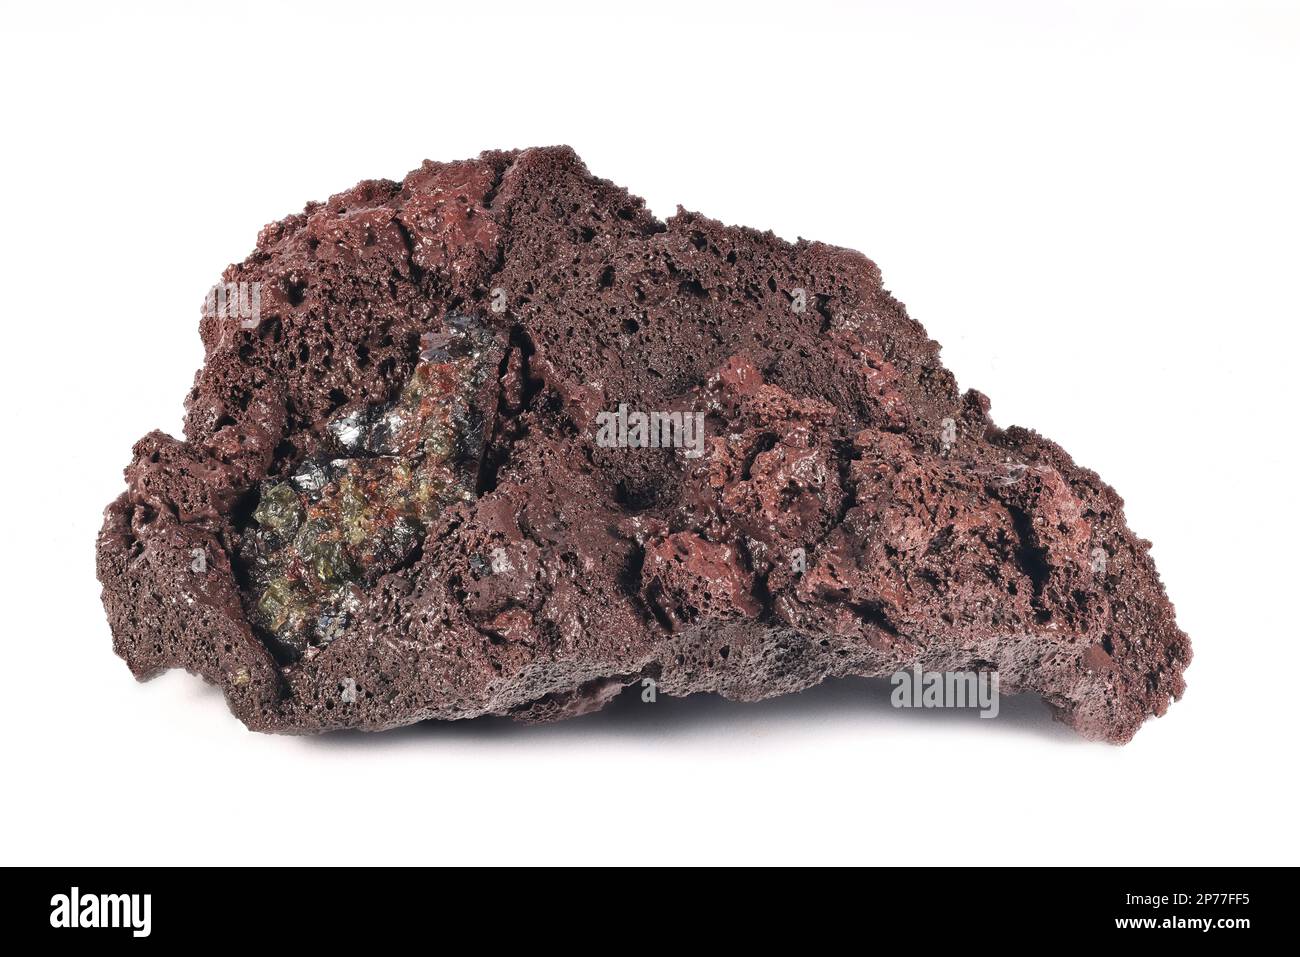 Scoria, pyroclastic, highly vesicular, dark-colored volcanic rock from Lanzarote, Spain Stock Photo